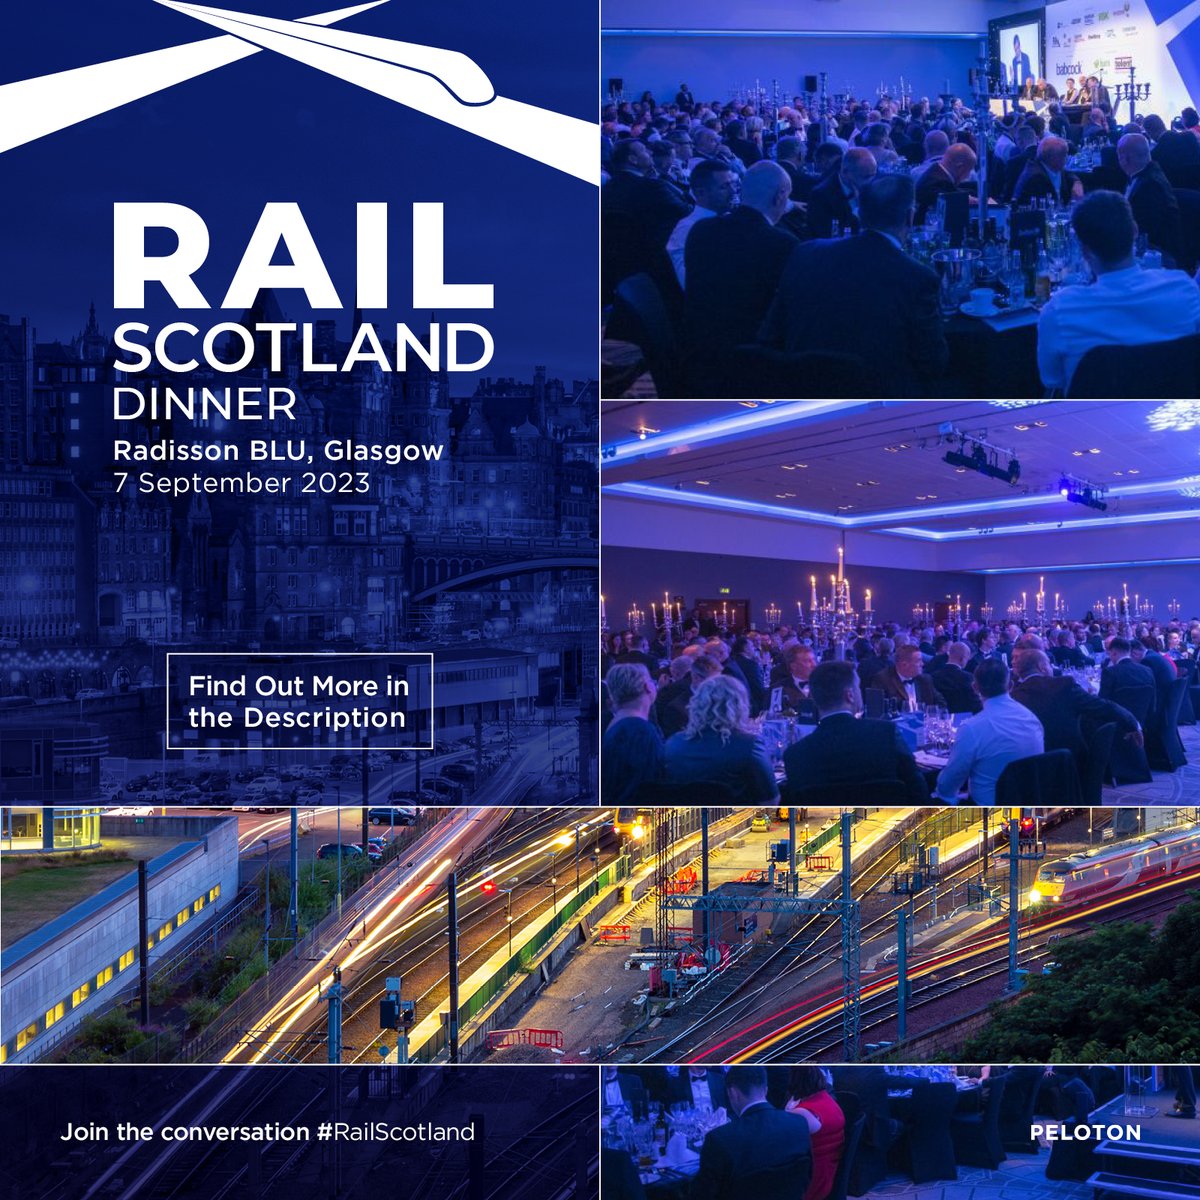 Join us for the Rail Scotland Dinner 2023! 

📆 Date: 7 September 2023
📍 Location: The Radisson BLU, Glasgow

Secure your place today ➡️ ow.ly/w7iK50Or3oB

#ConnectingScotland #Scotland #Rail #Railways #RailIndustry #ScotlandRail #RailInnovation #RailSustainability